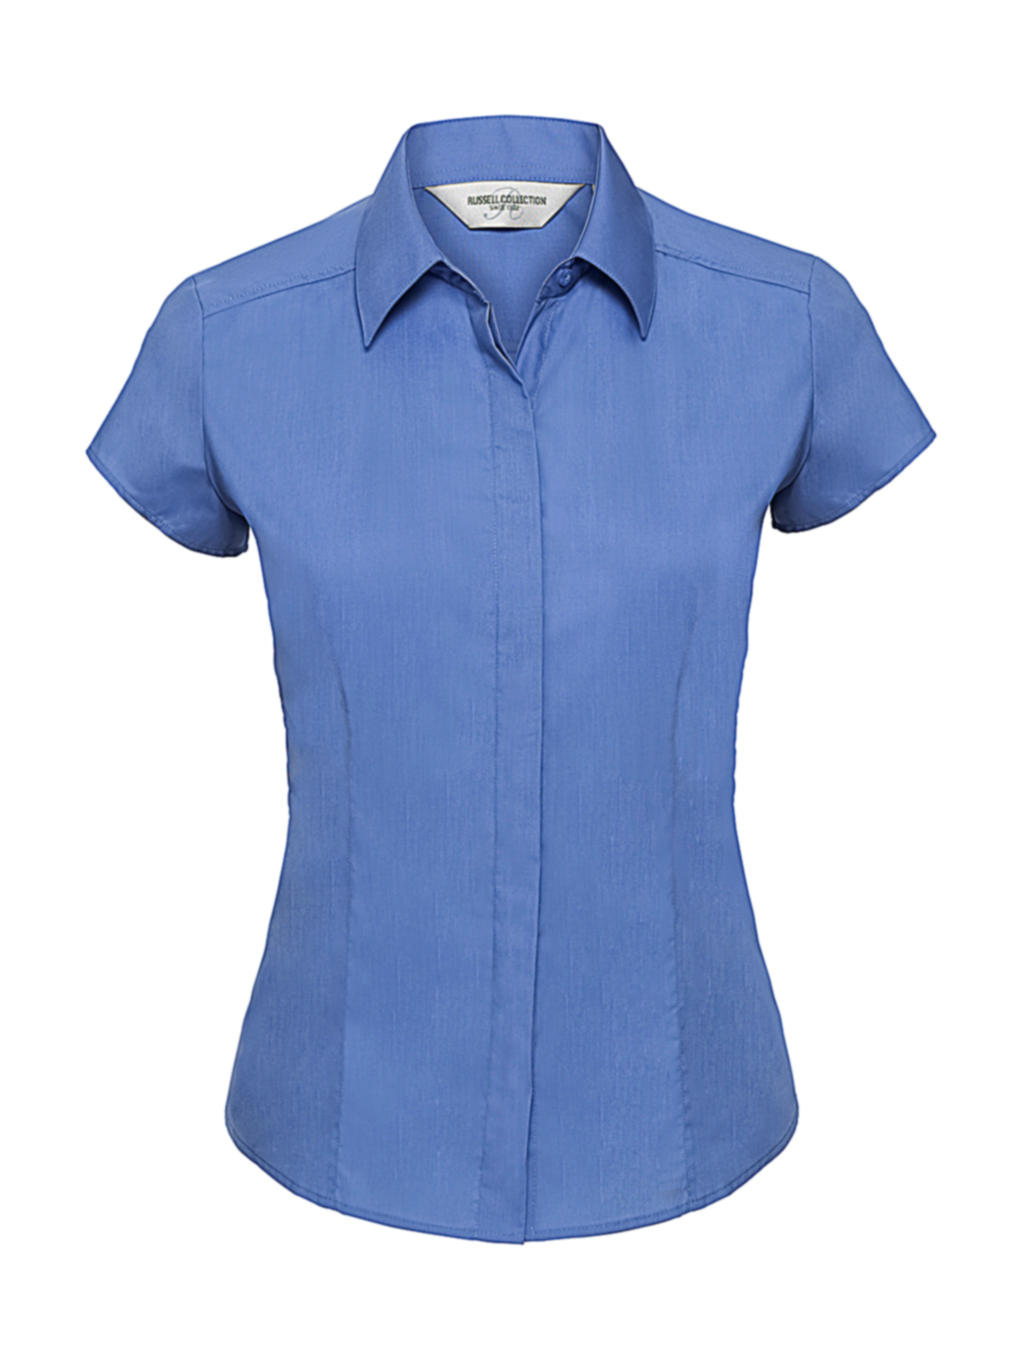  Ladies Fitted Poplin Shirt in Farbe Corporate Blue